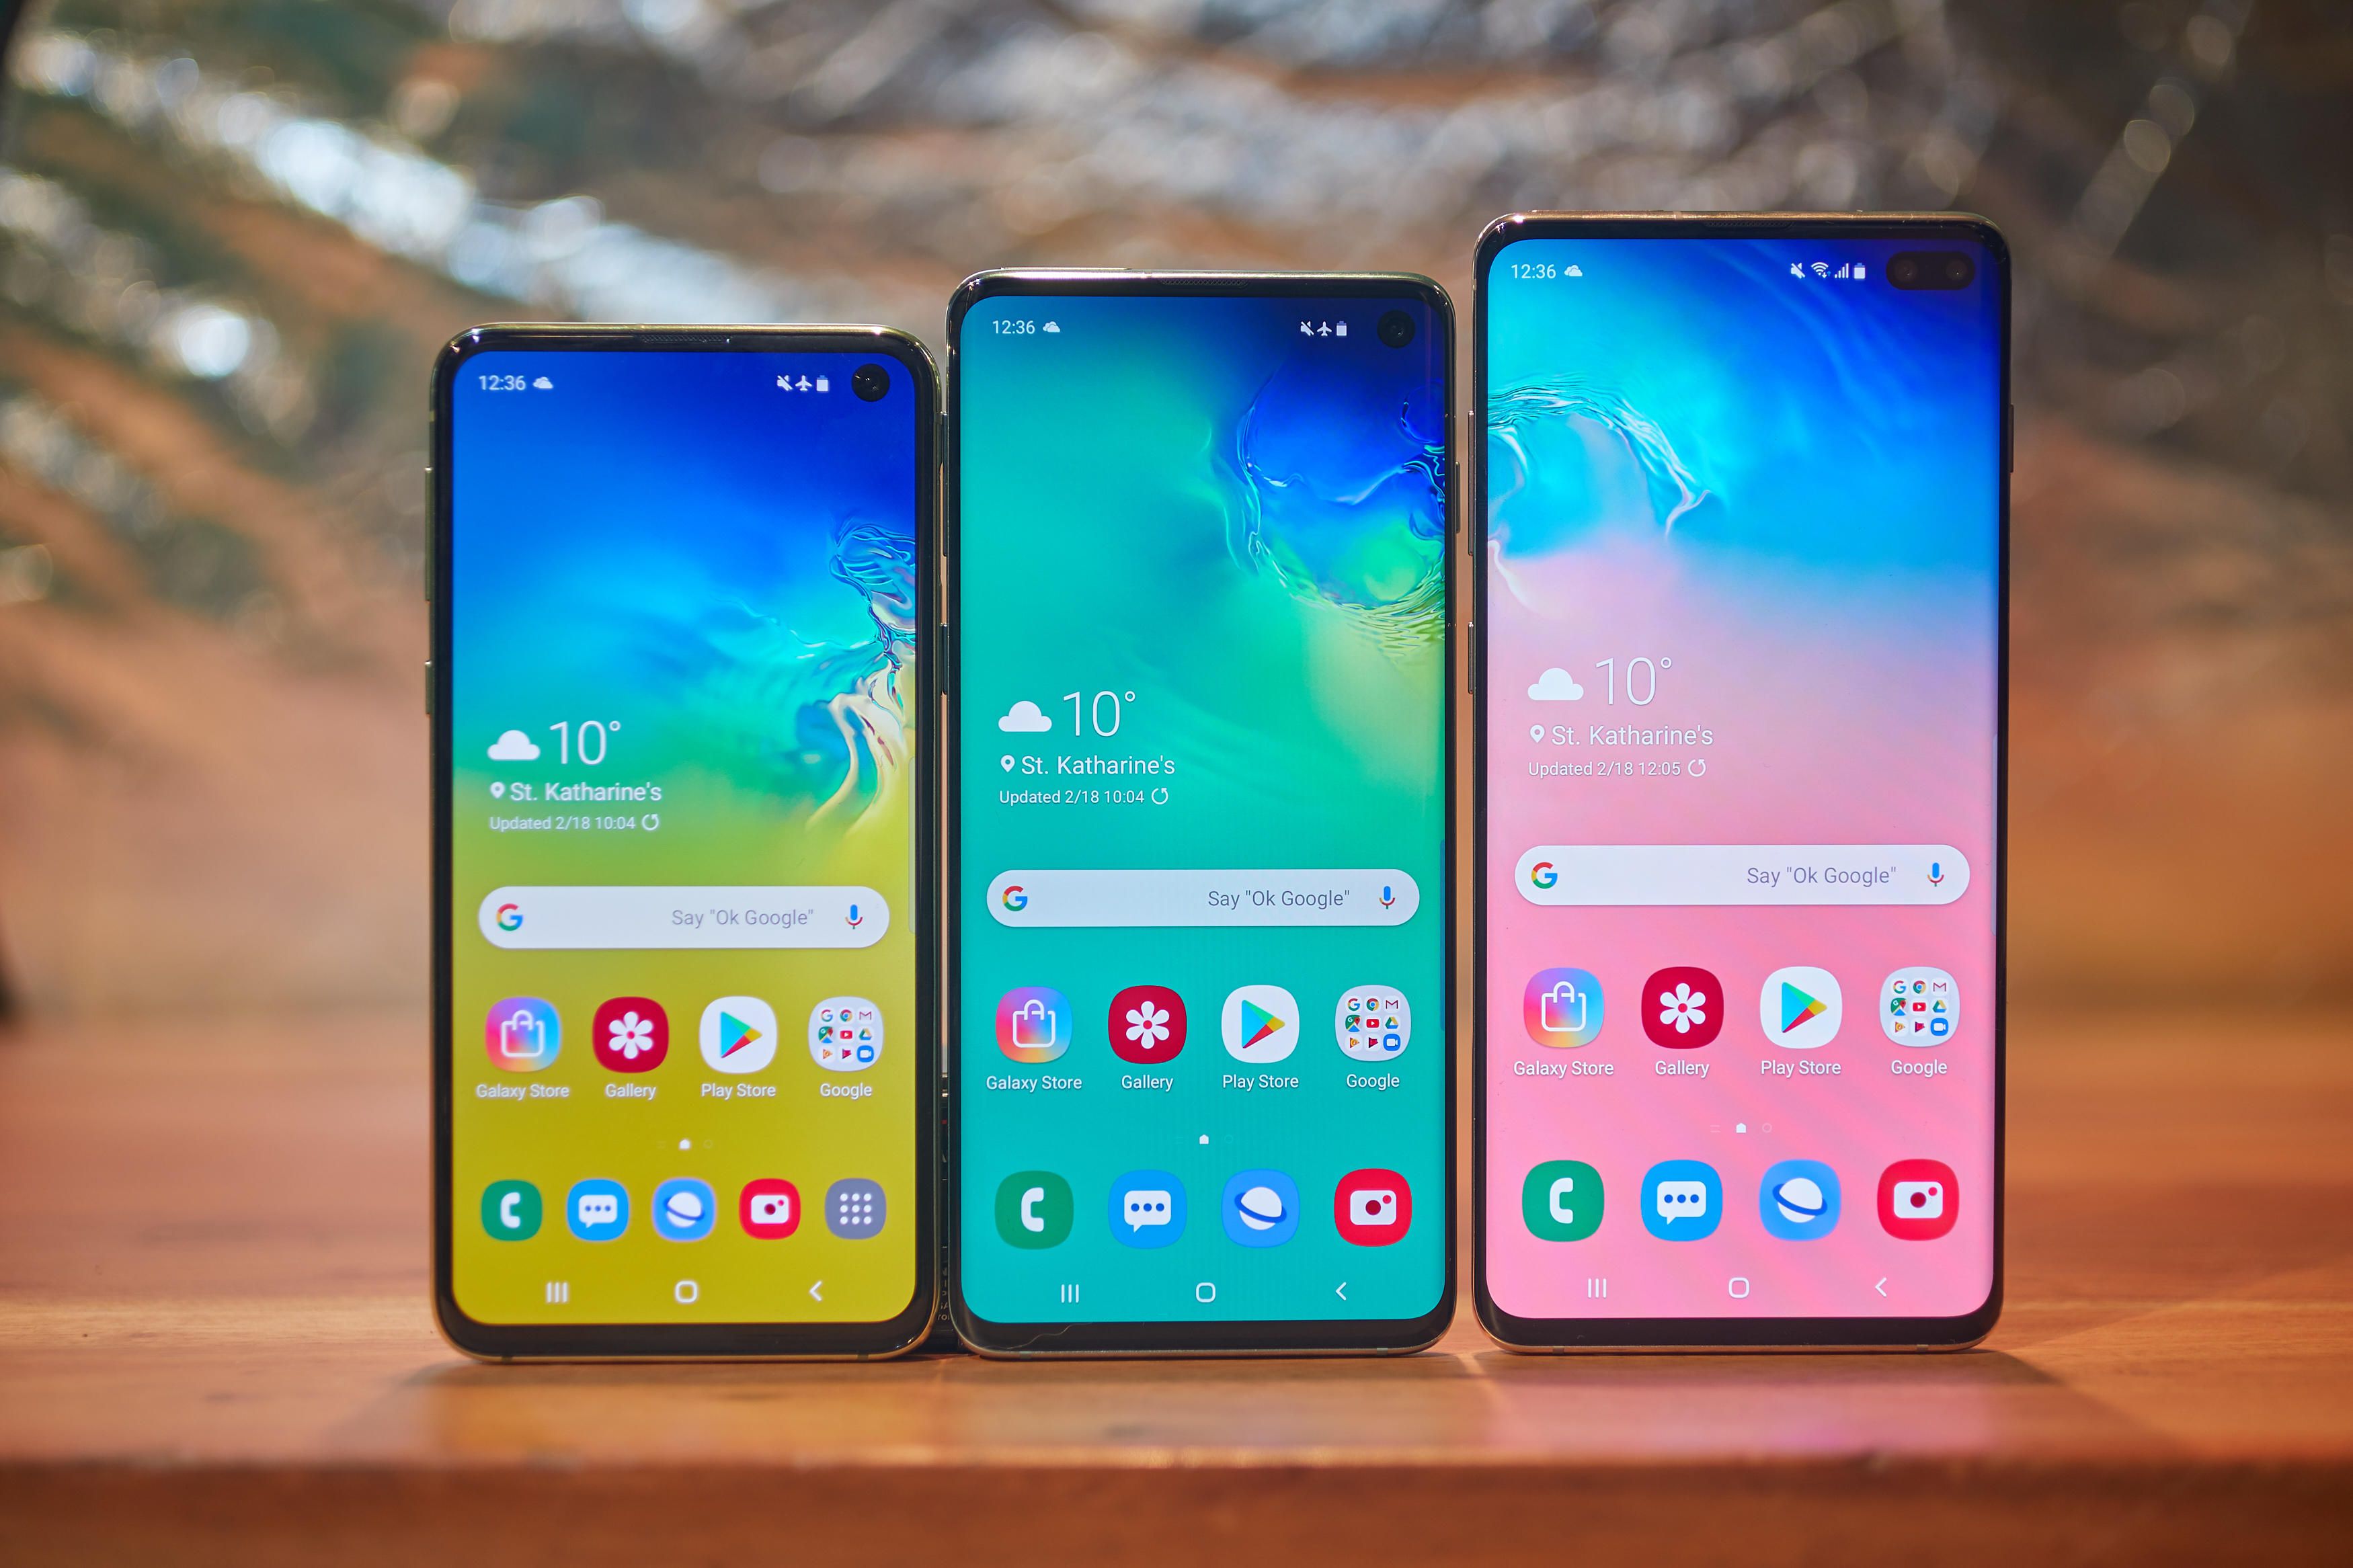 Samsung Galaxy S10, S10 Plus, S10E, and S10 5G; Here are Samsung's 2019 flagships - Dignited